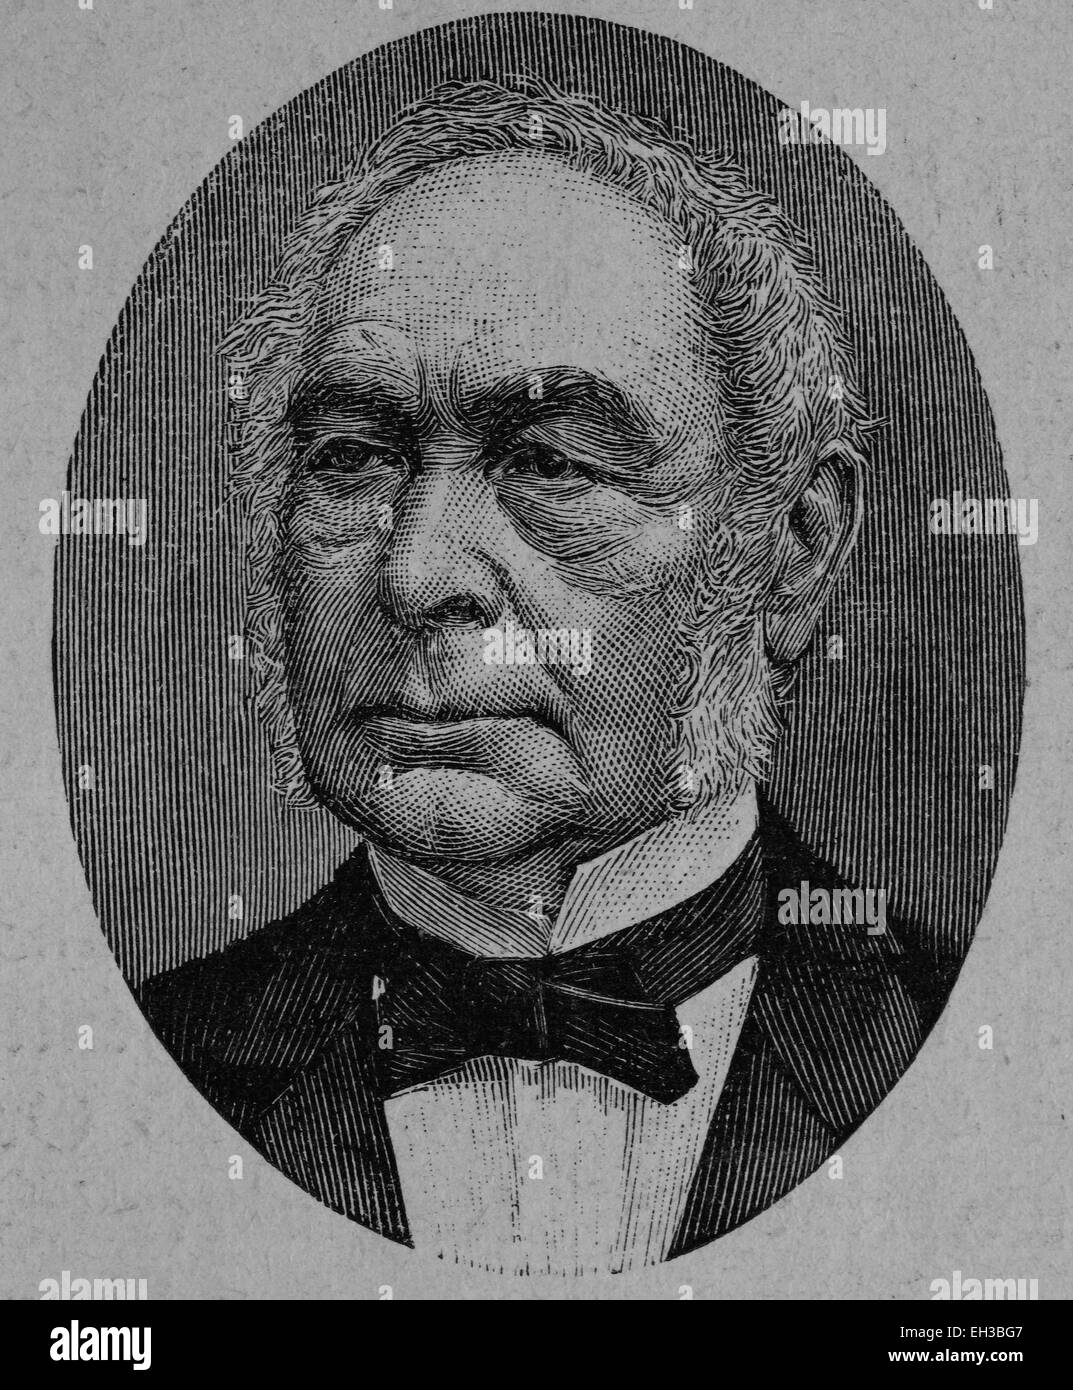 Frankfurter Parlament: Georg Bernhard Simson, 1817 - 1897, a Prussian lawyer and politician, wood engraving, about 1880 Stock Photo